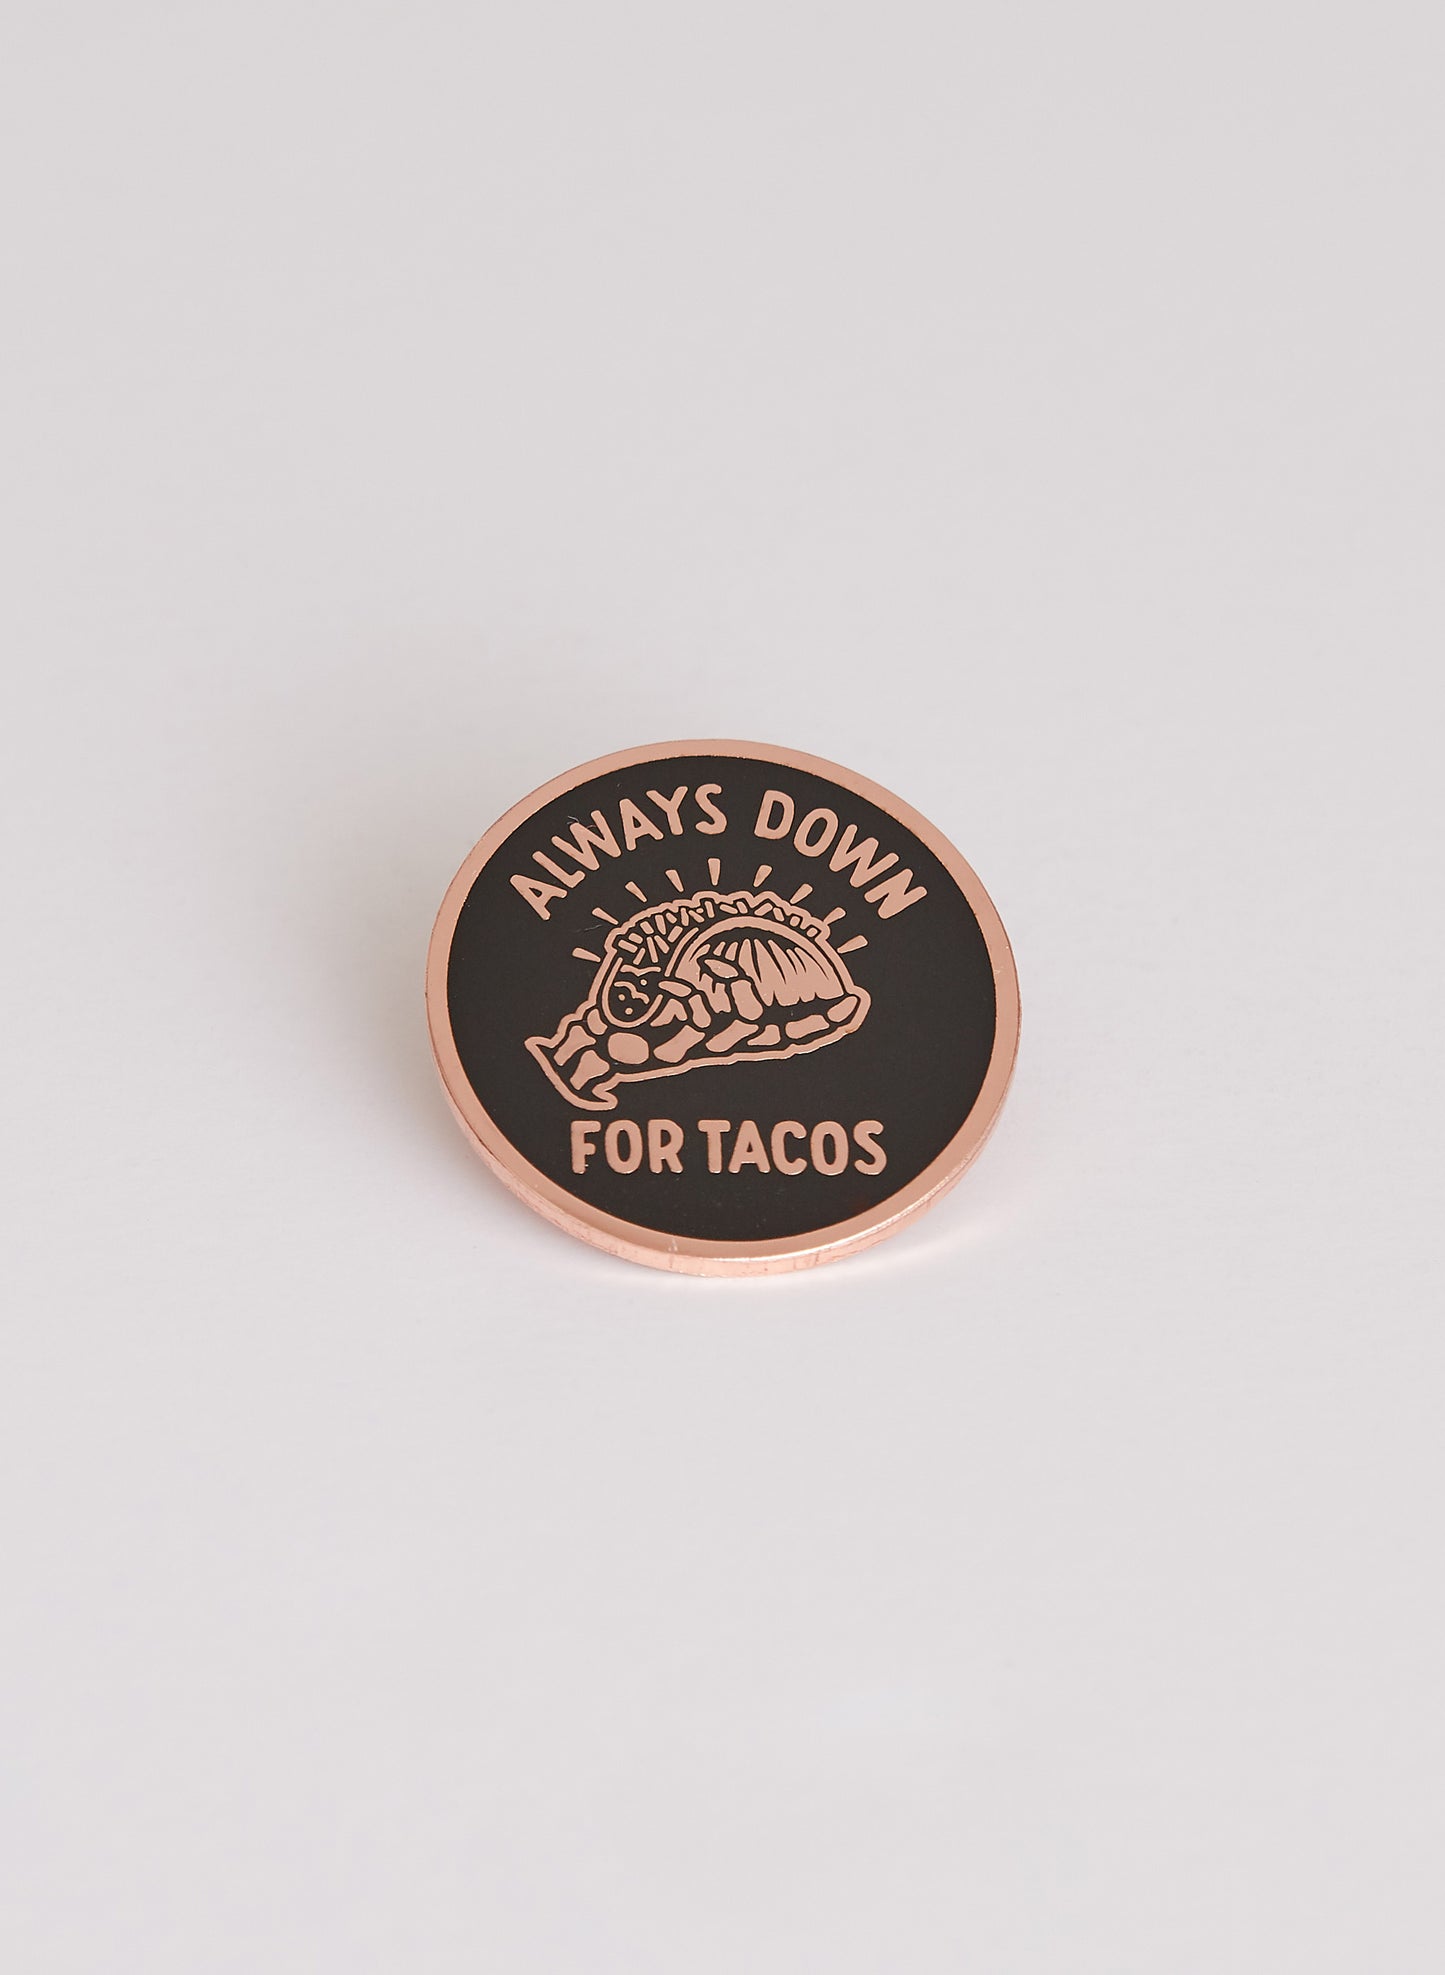 Always Down For Tacos Taco Tuesday Foodie Enamel Pin Lapel